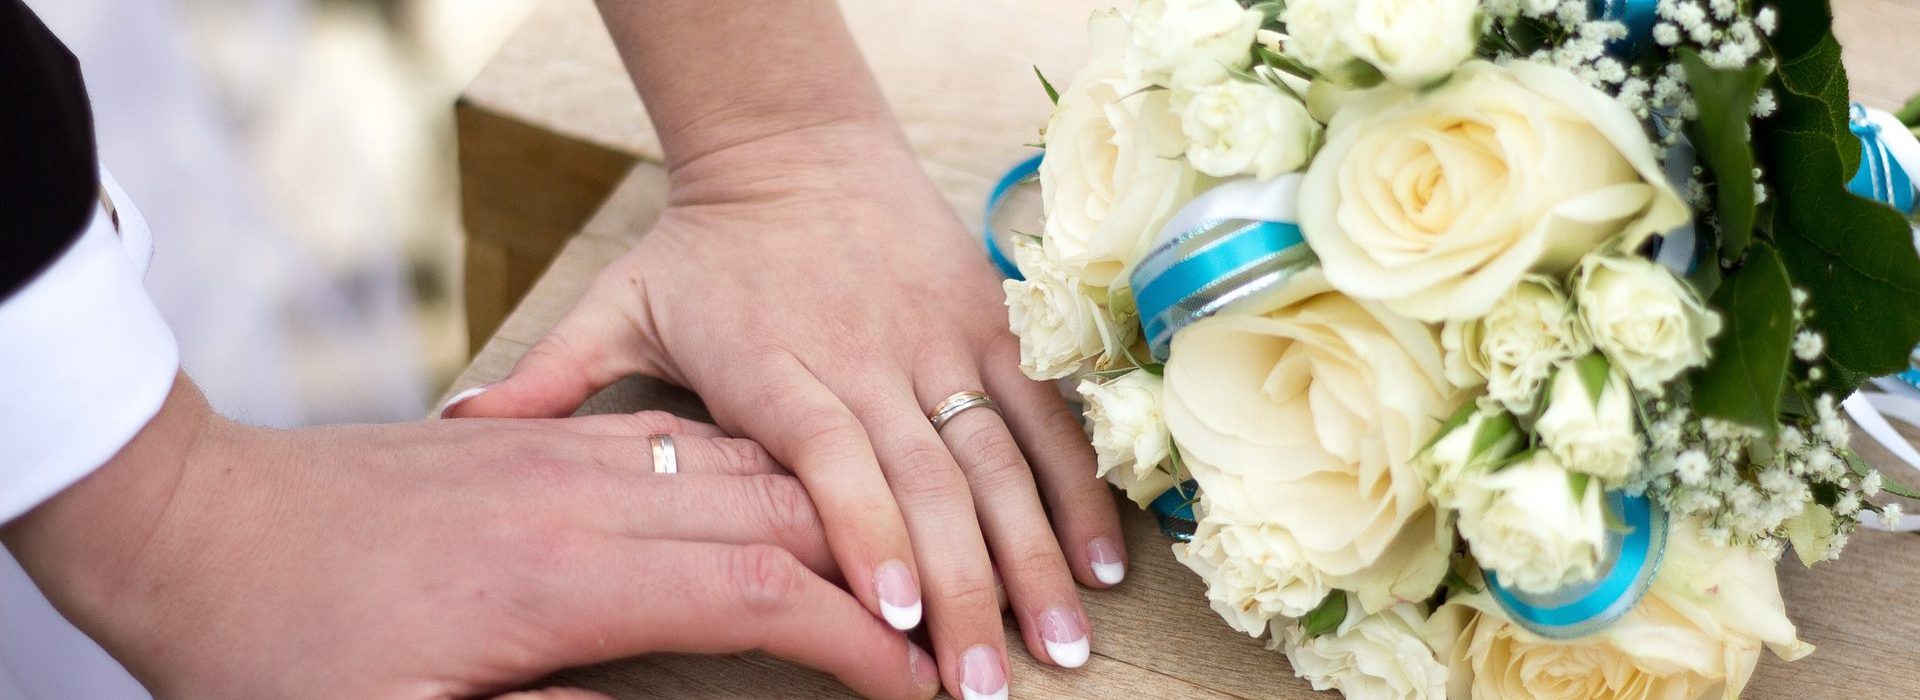 Woman's hand over man's hand next to wedding flowers